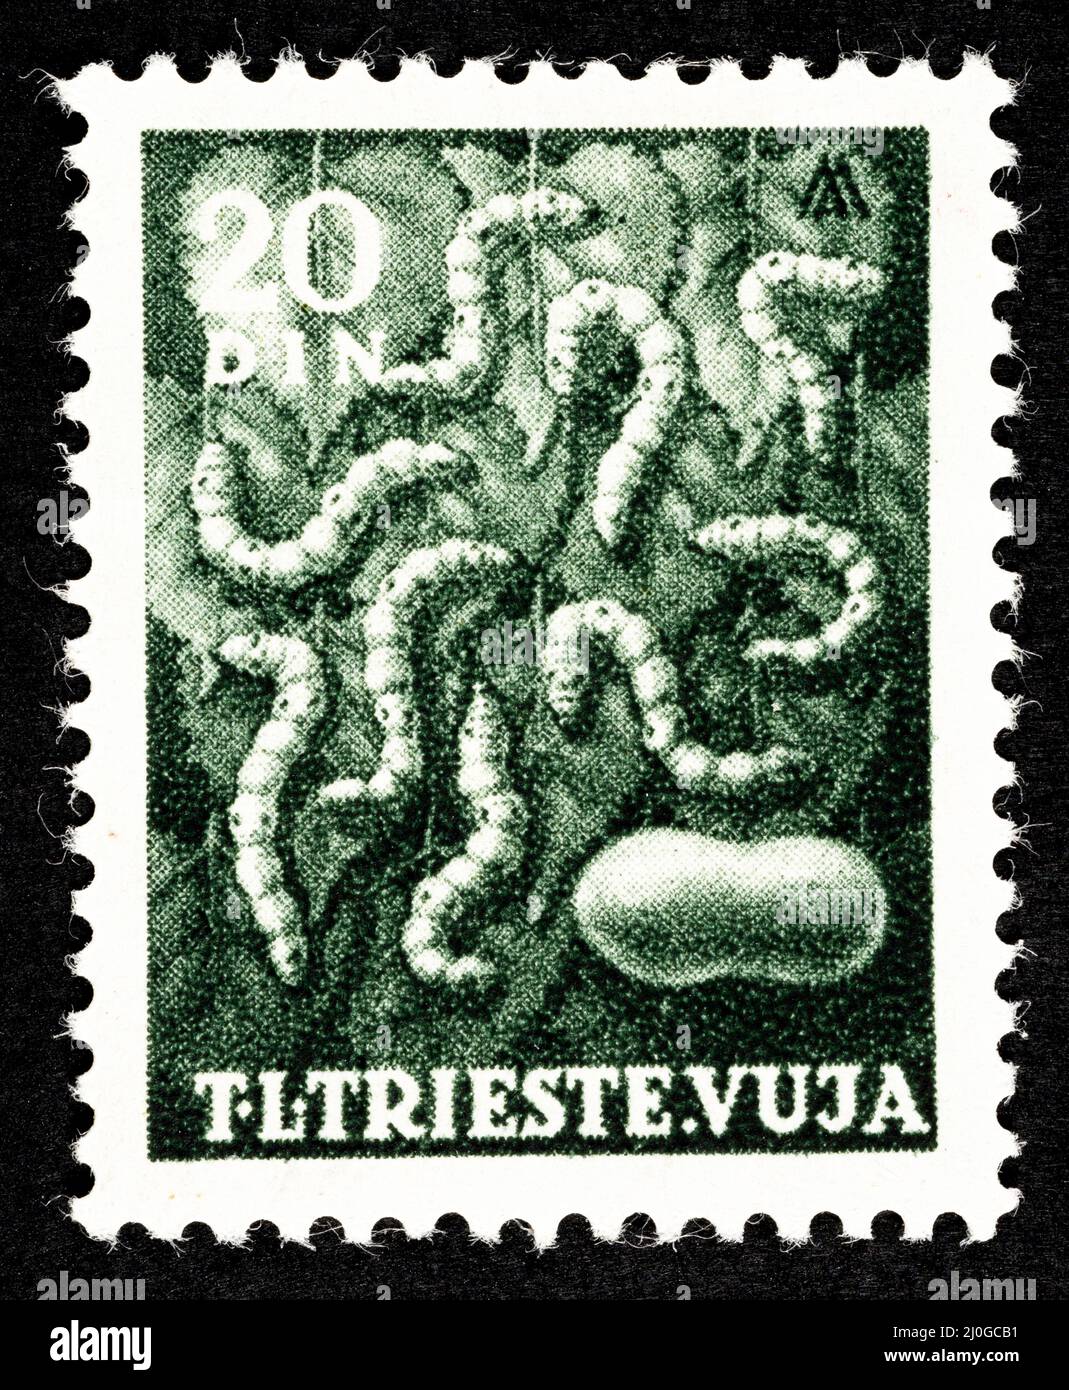 Commemorative postage stamp from the former Yugoslavia, overprinted STT VUJNA, with the illustration of silkworms of the free territory of Trieste, zo Stock Photo